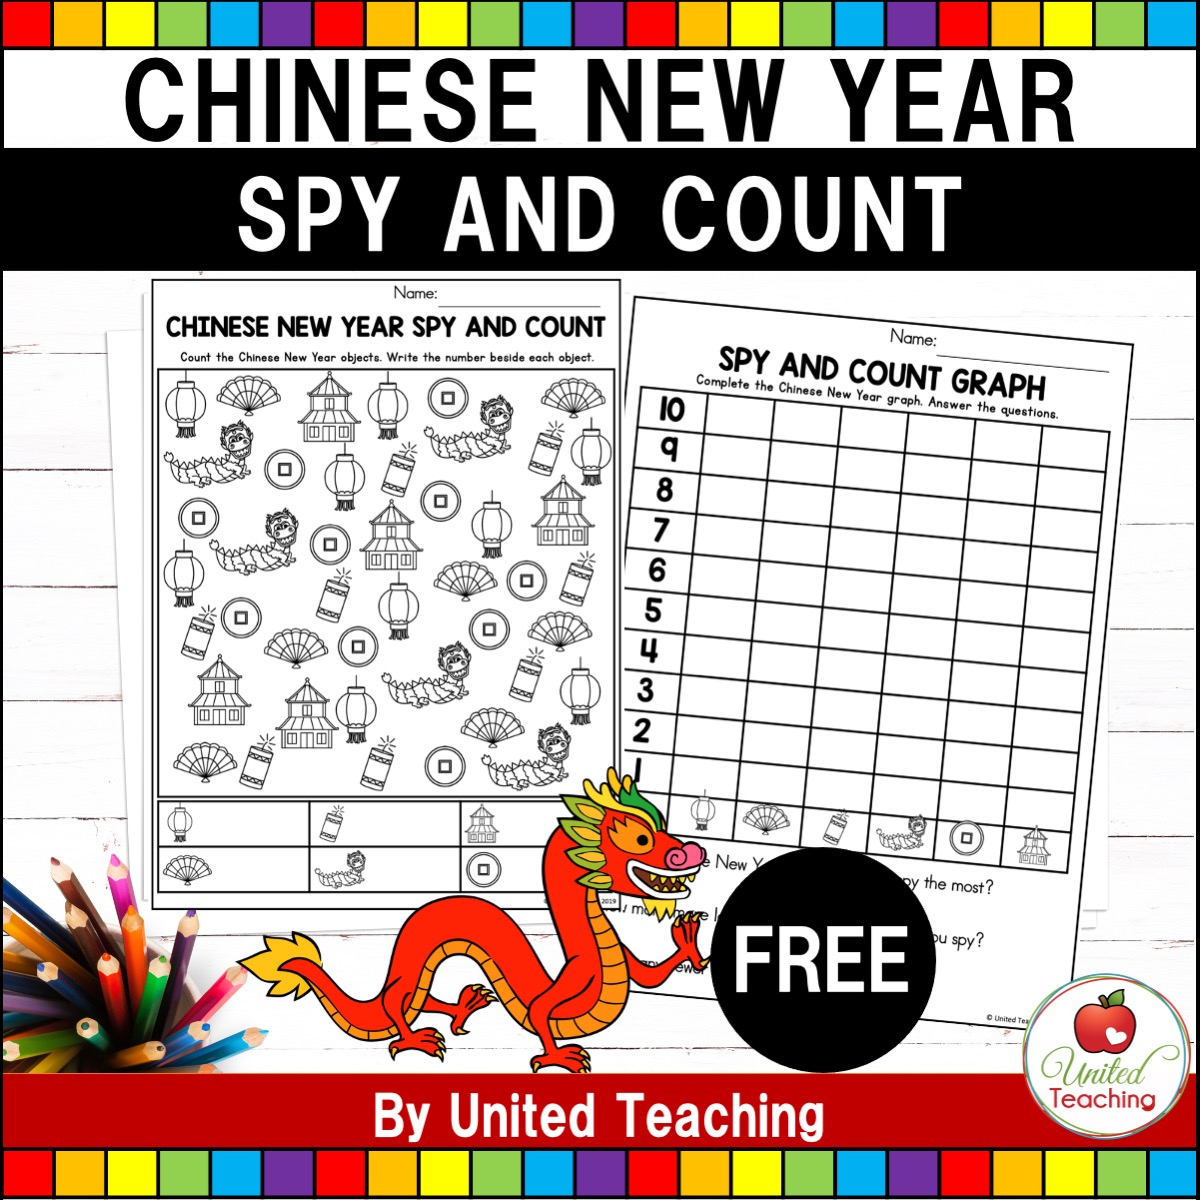 Chinese New Year Spy and Count free math activity